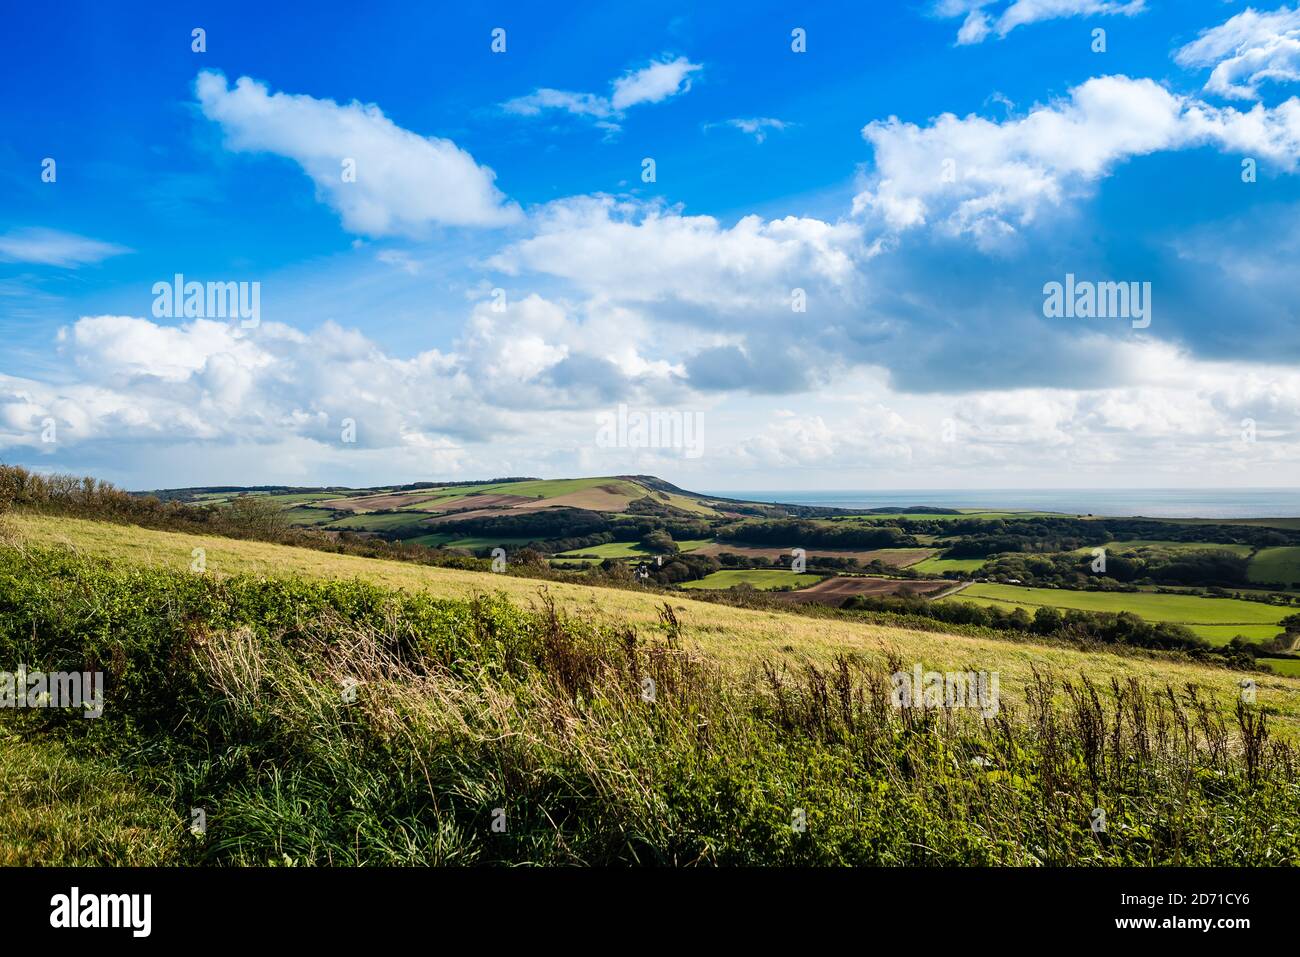 View towards Kimmeridge Bay from the Purbeck hills. Stock Photo